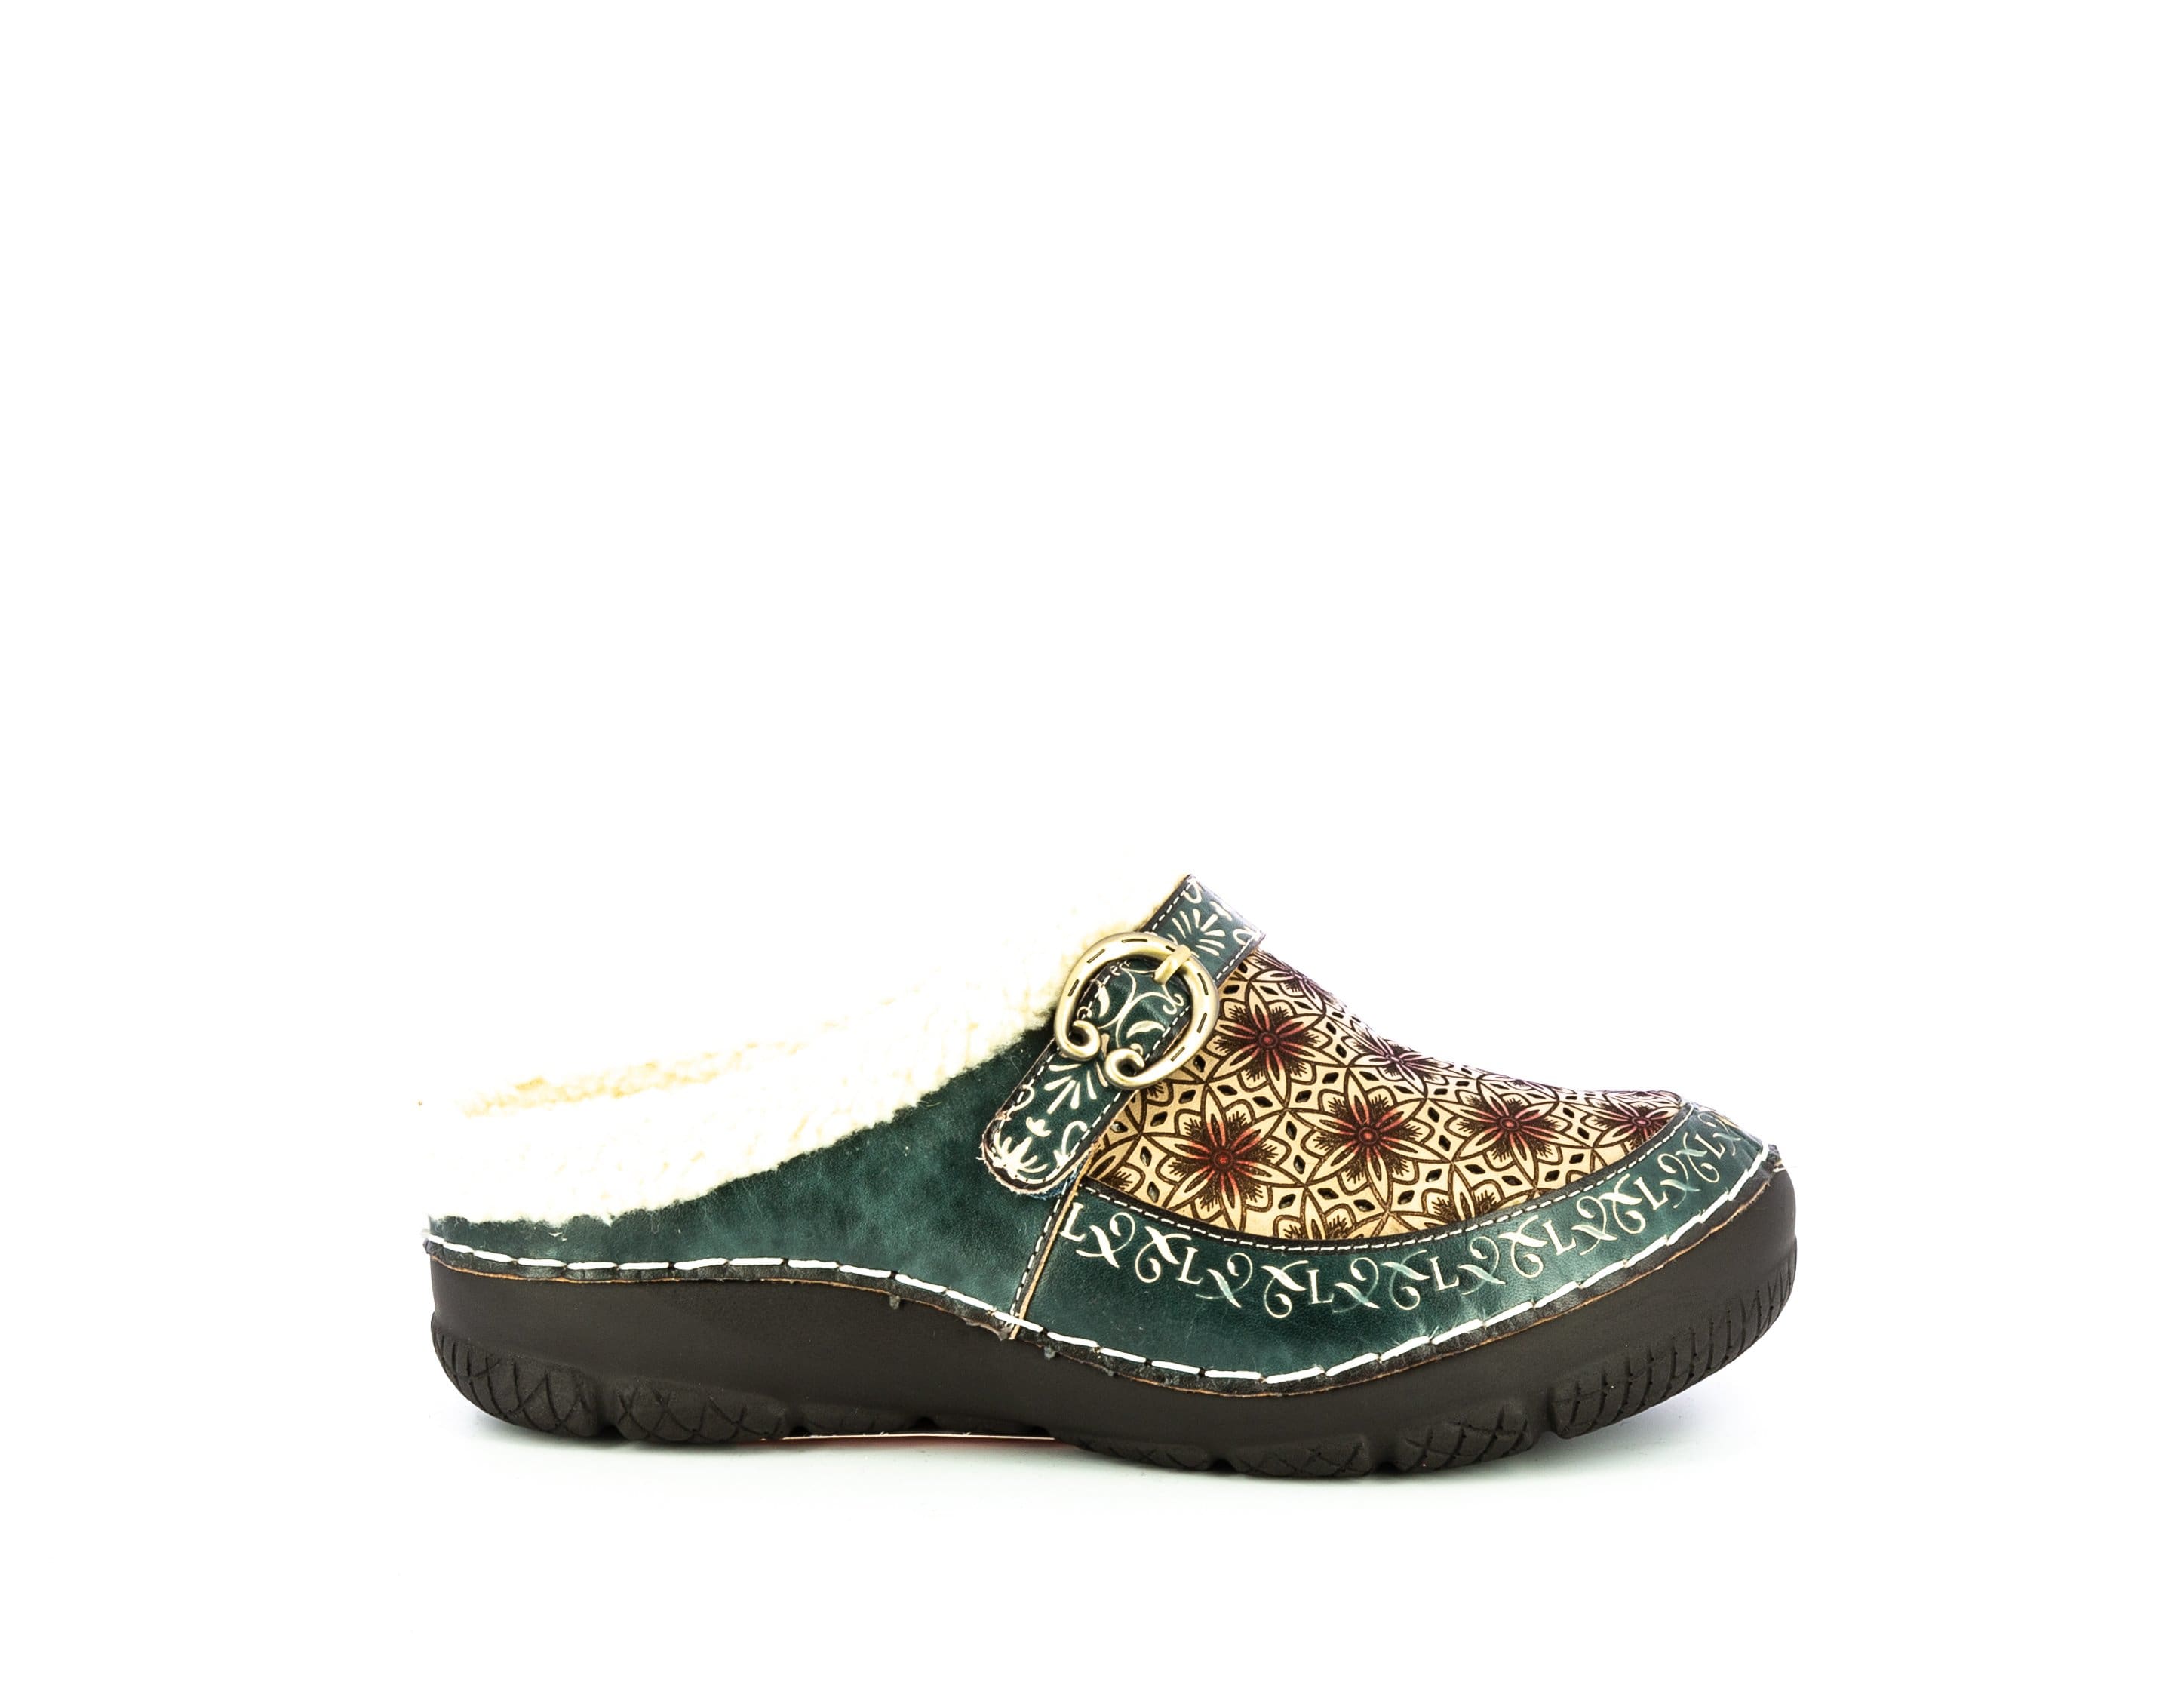 Zapato IDCELETTEO 01 - 35 / Jeans - Mulle